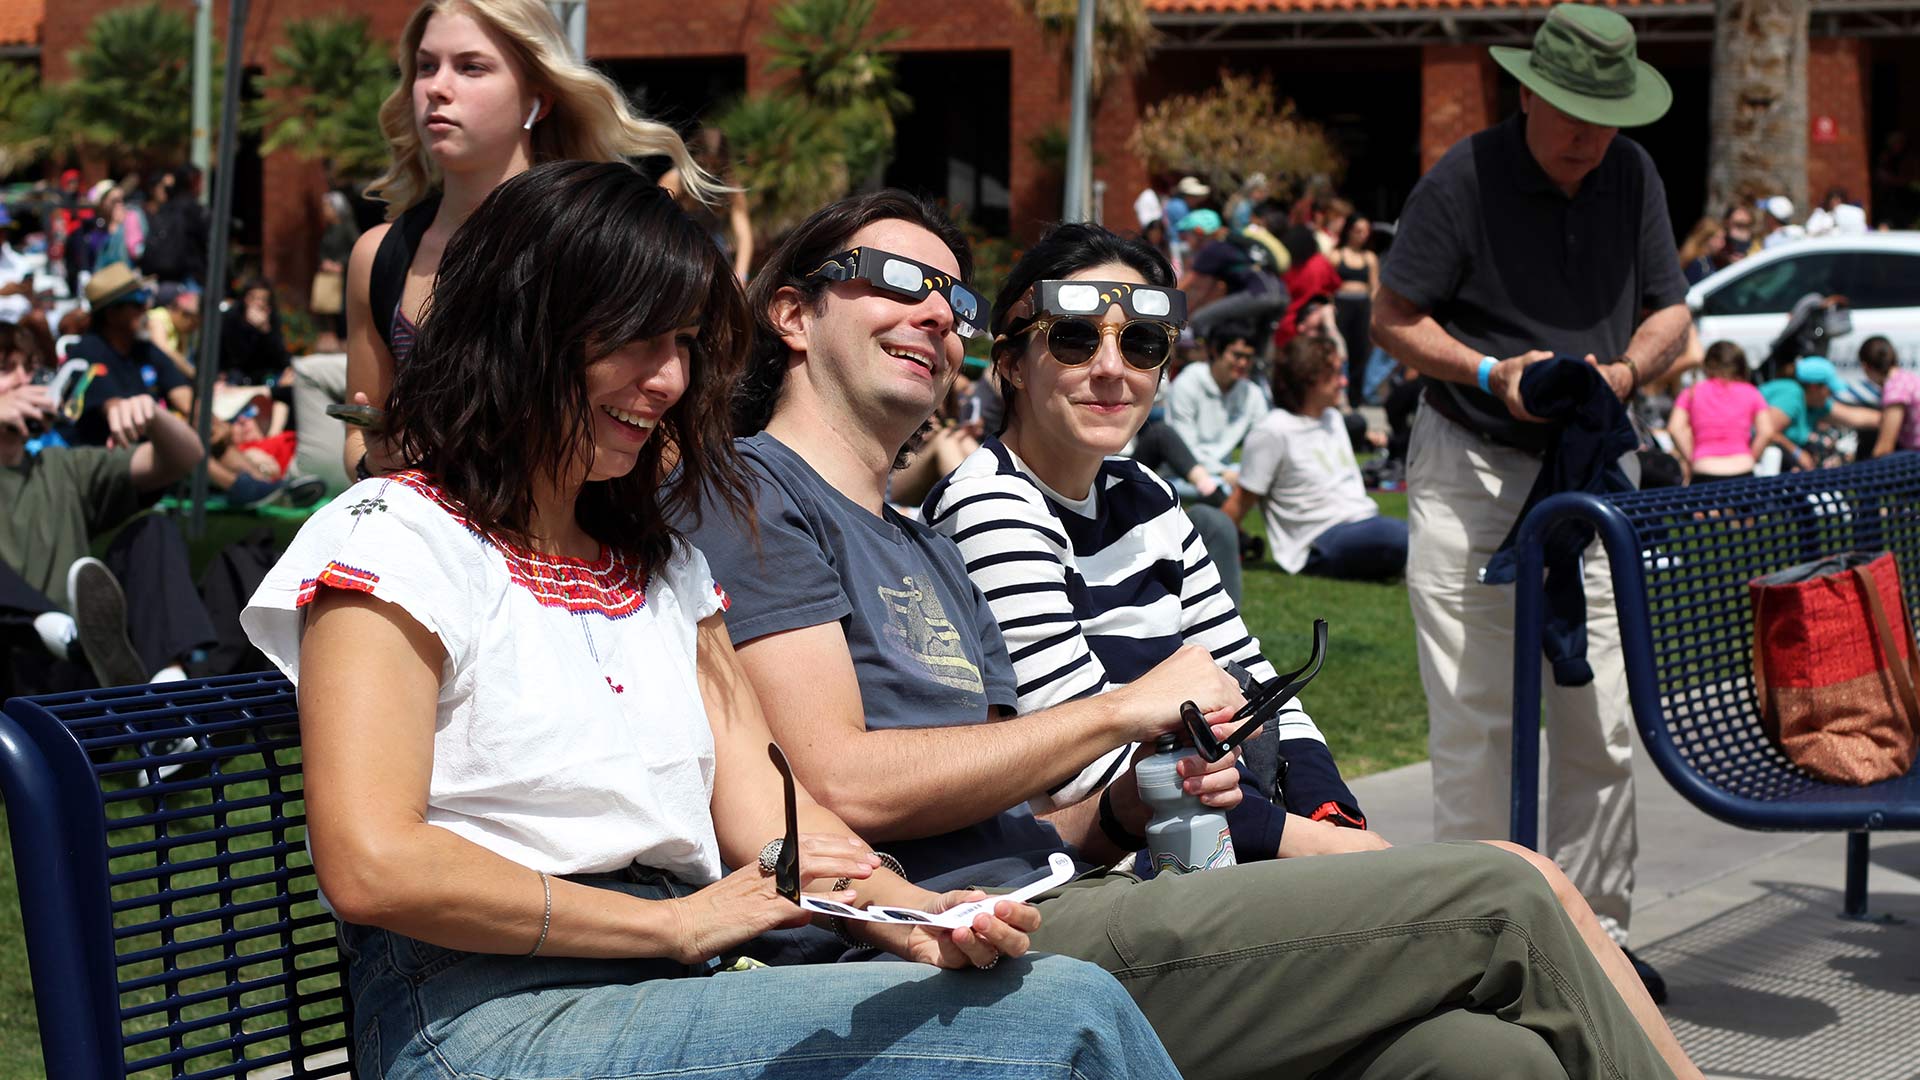 Sun, moon, and spectacle: Thousands flock to UA mall for solar eclipse